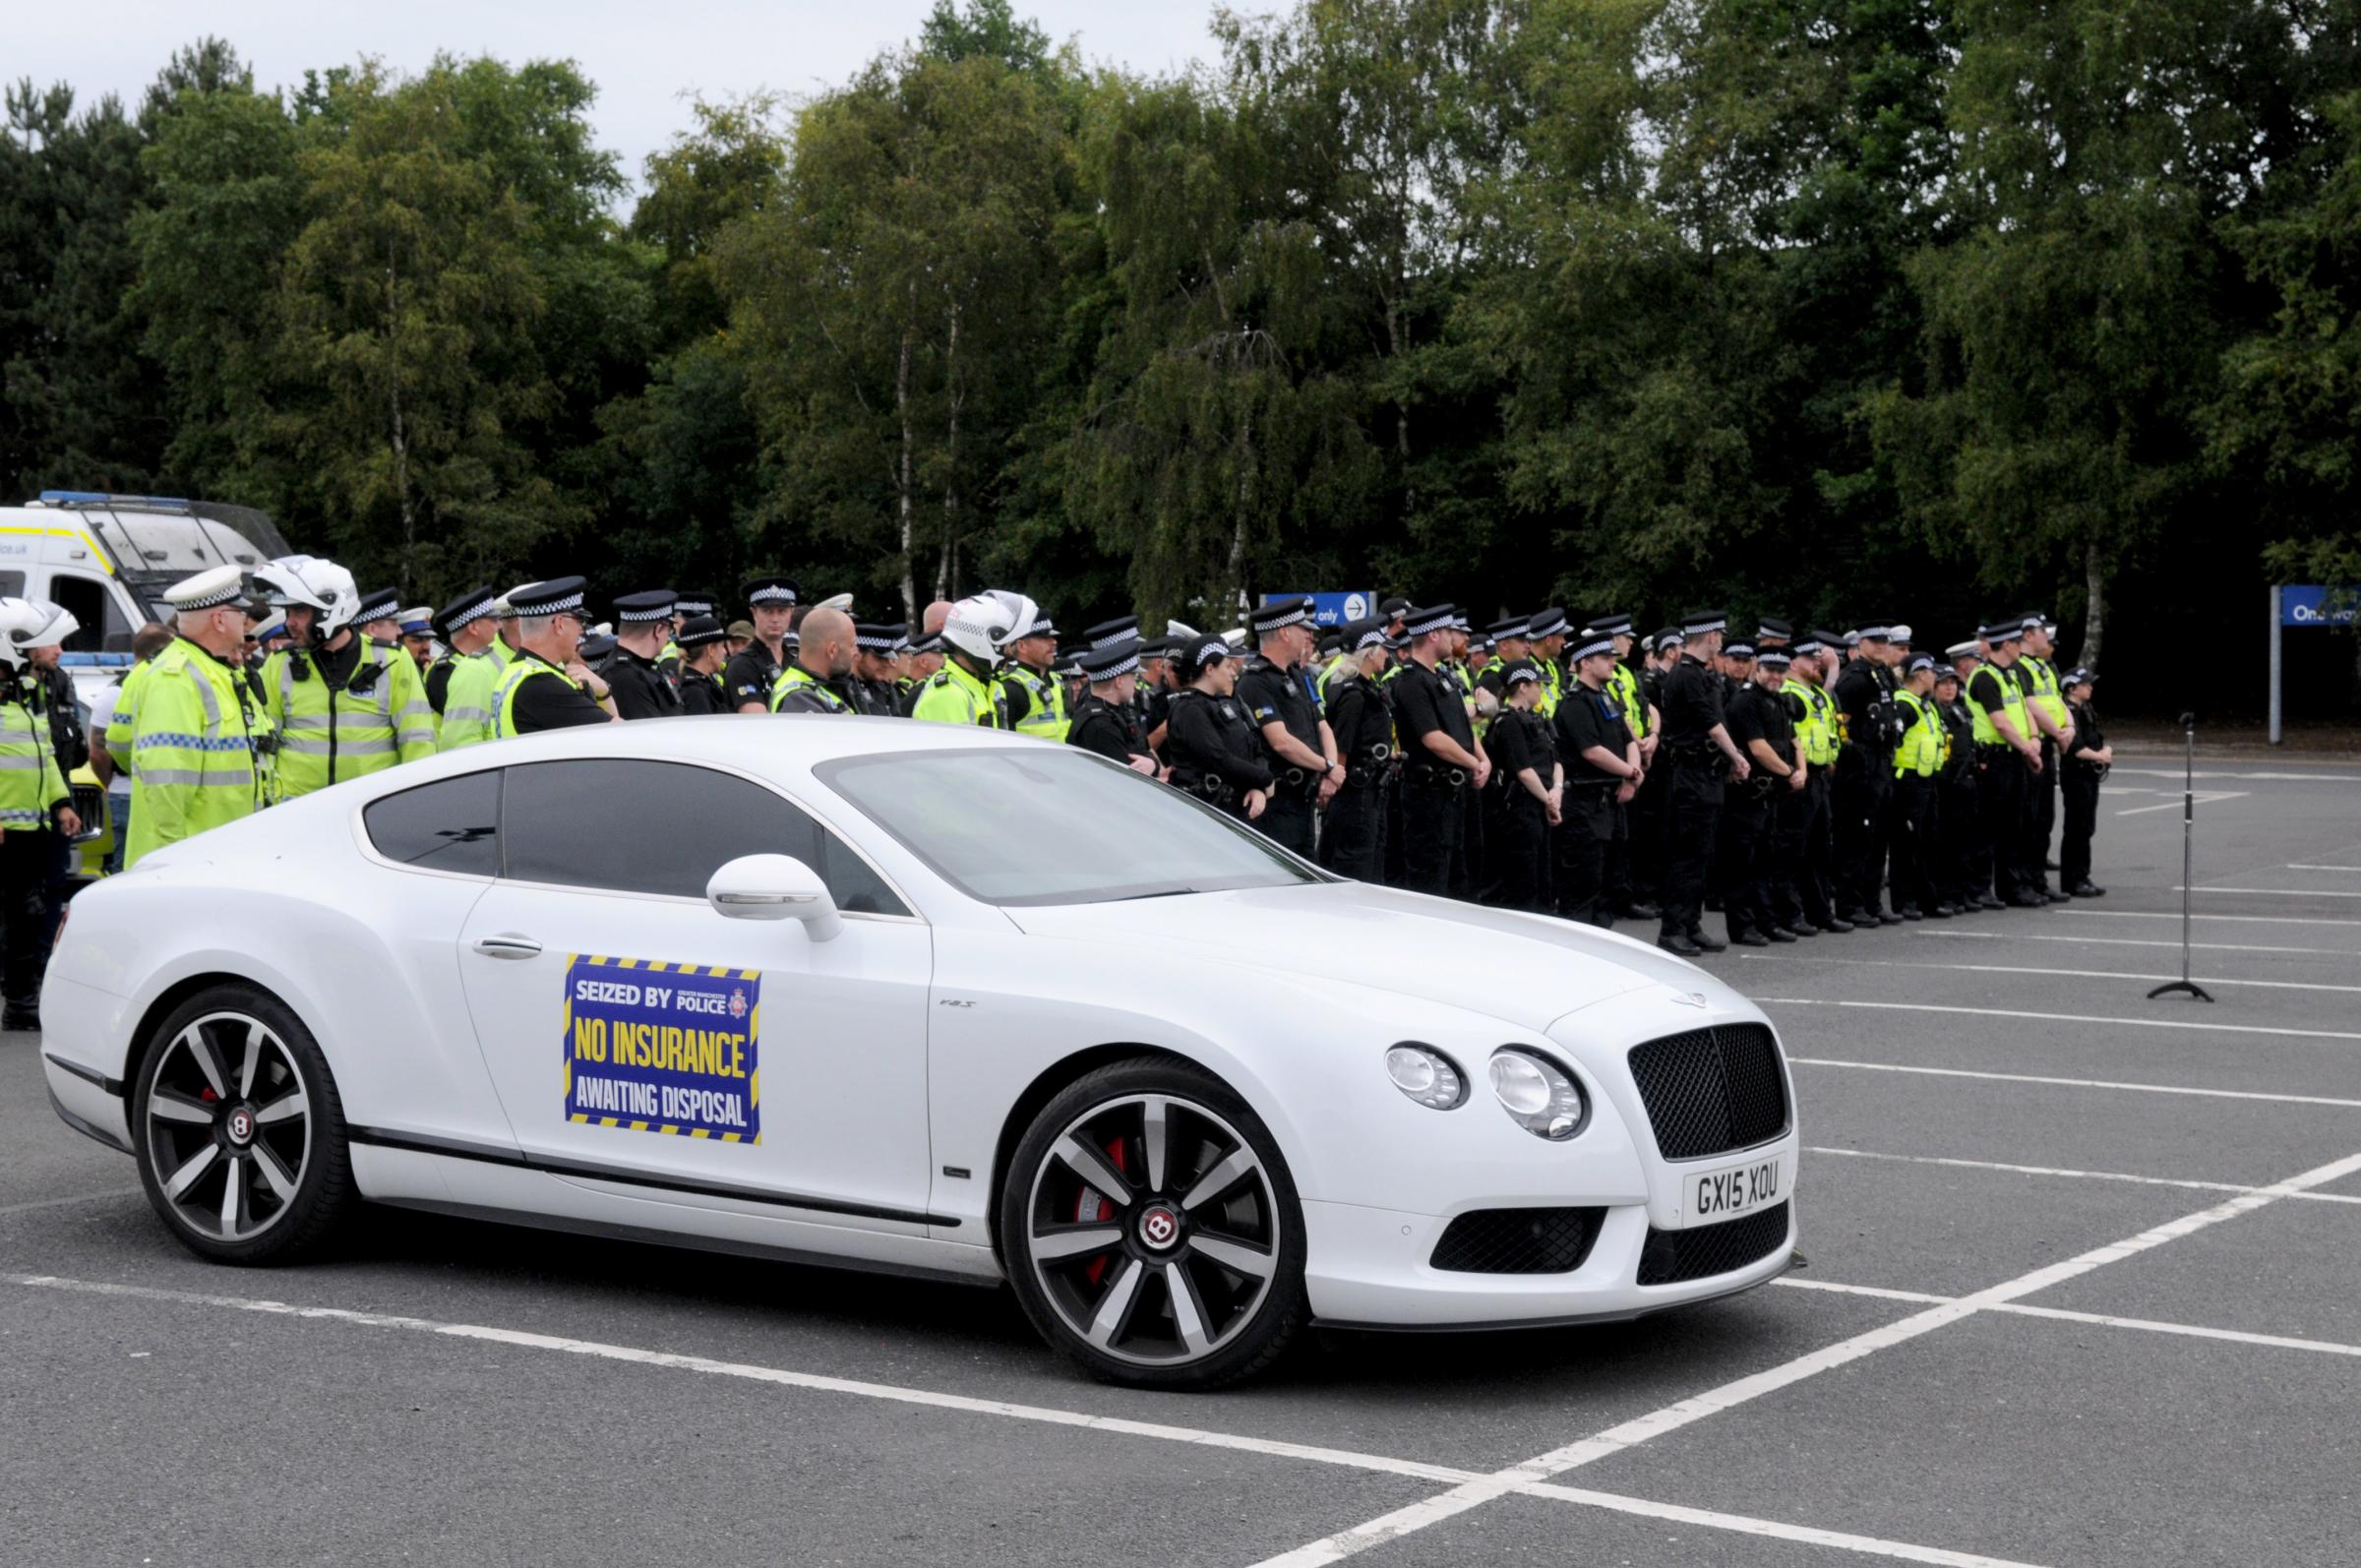 A Bentley has been seized by police as part of the operation (Image: Dave Gillespie)